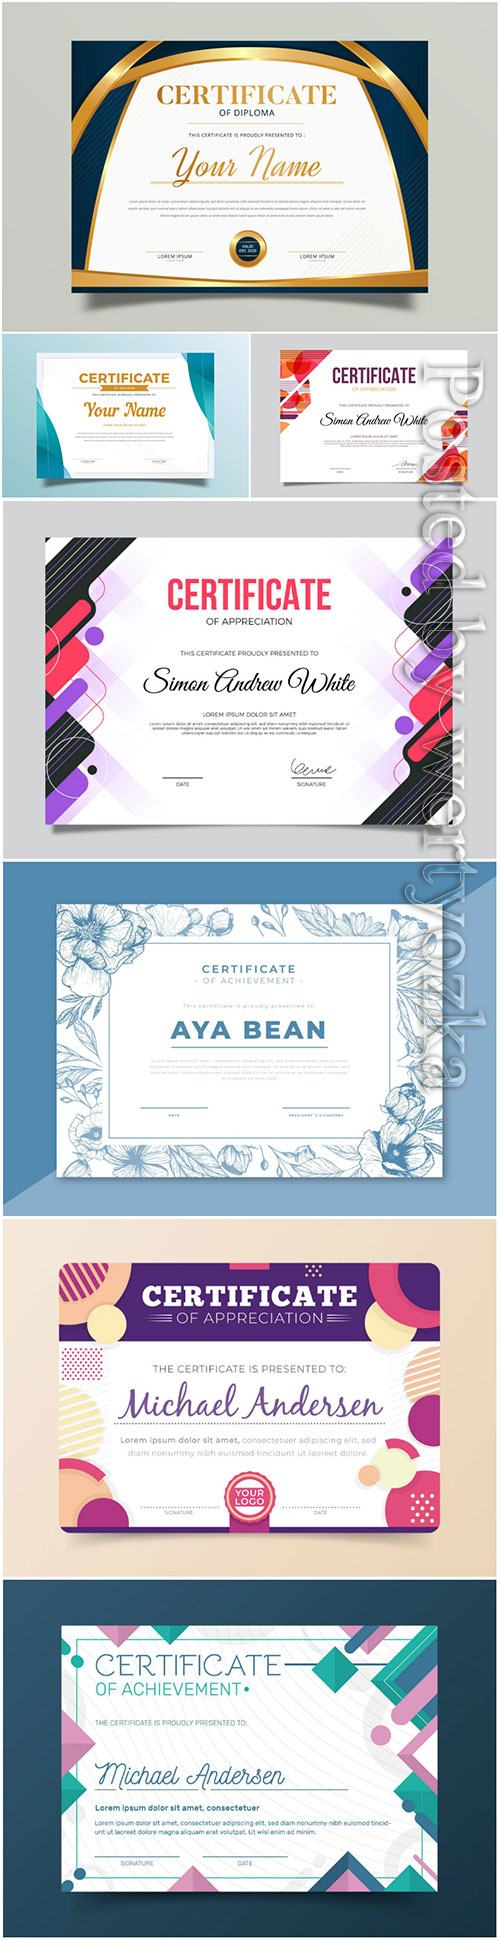 Certificates and diplomas templates in vector